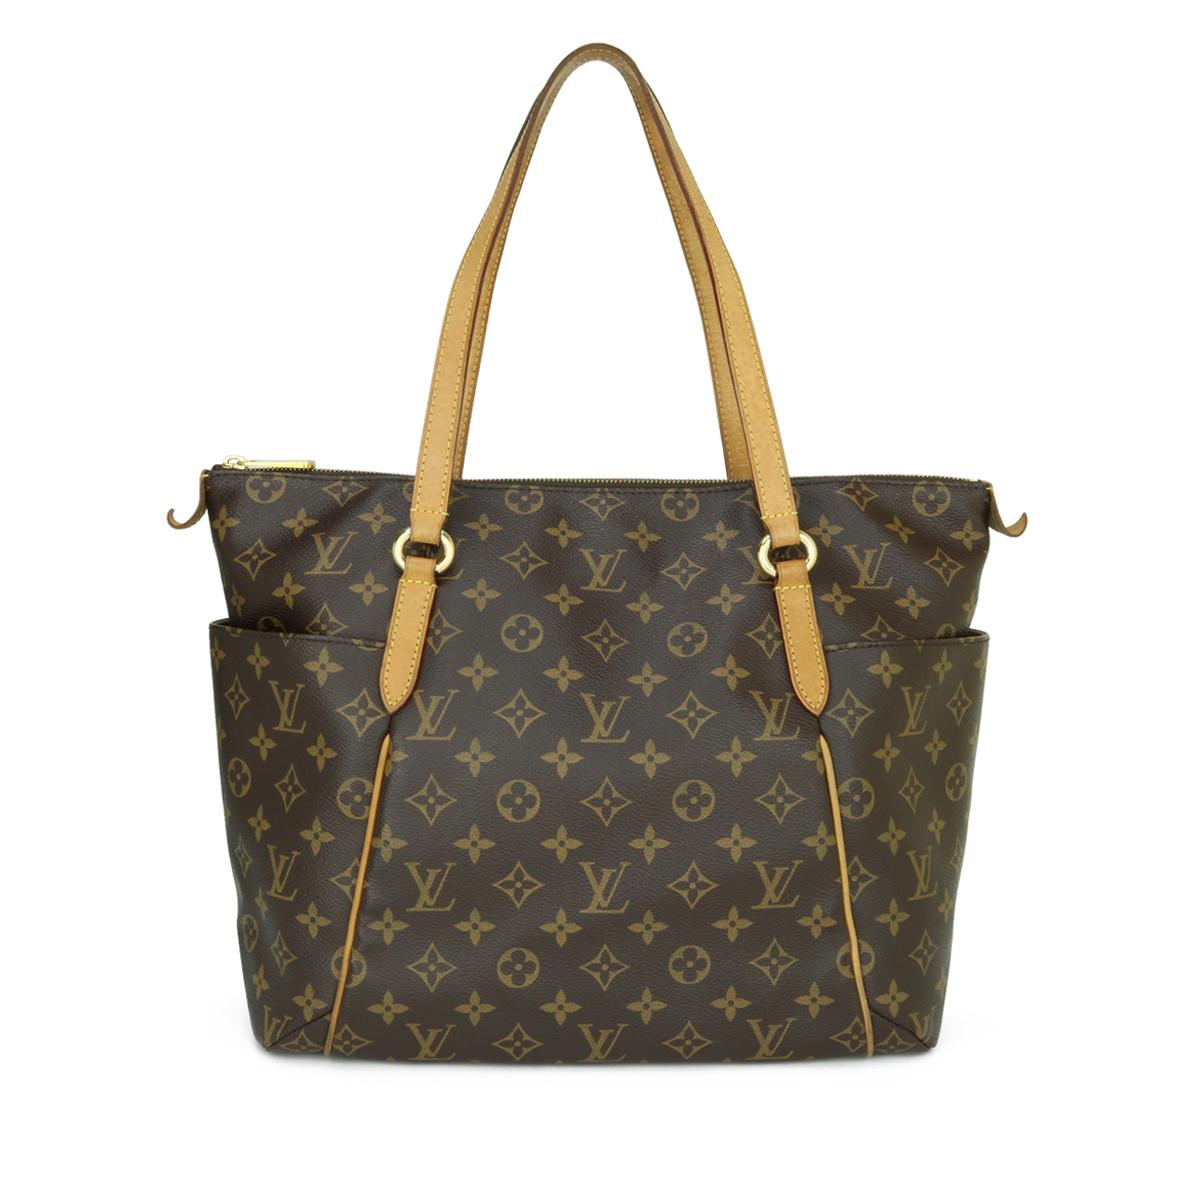 Louis Vuitton Totally MM Bag in Monogram 2011.

This bag is in good condition. 

- Exterior Condition: Good condition. Light rubbing to four base corners. General marking, darkening and leather wear around the vachetta cowhide trim.

- Handles: Good